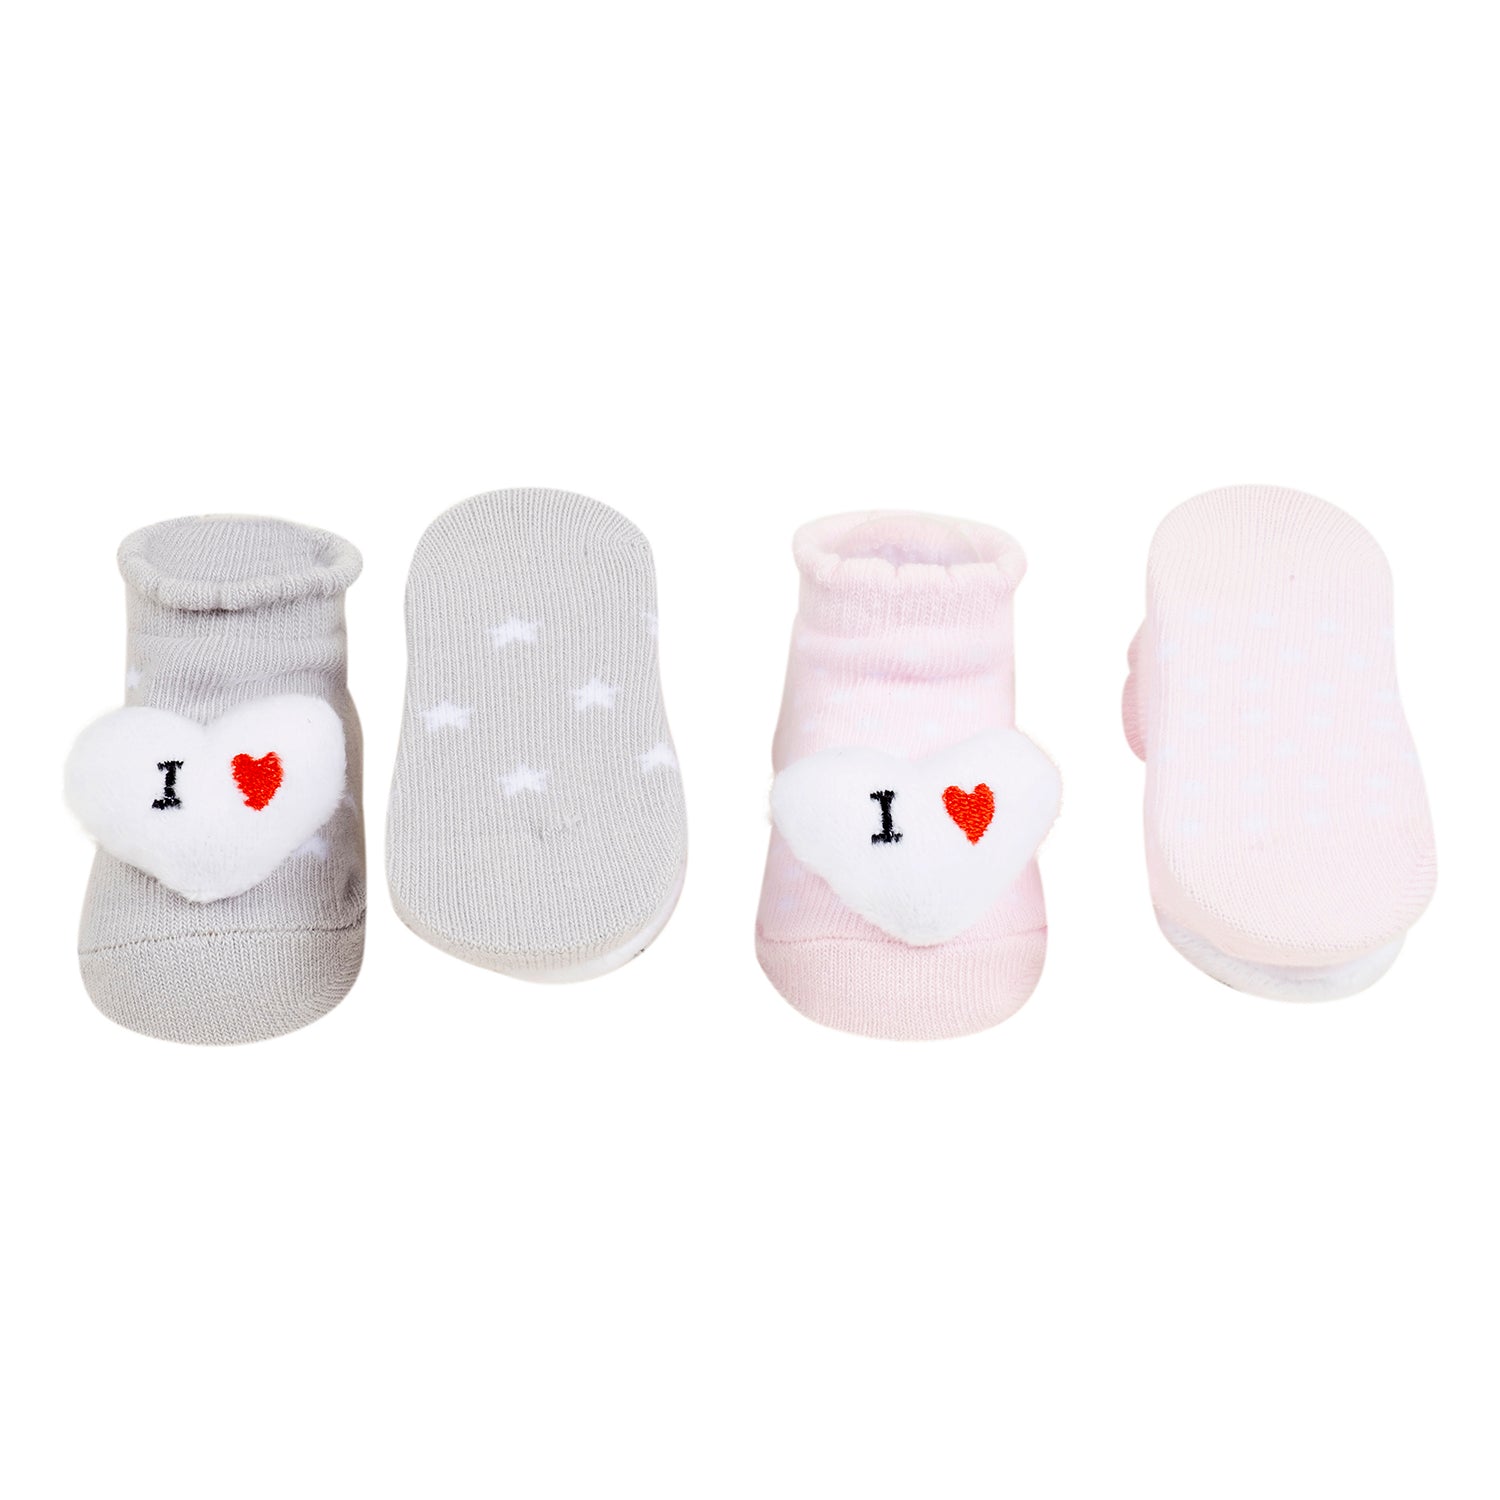 Baby Moo 3D I Love Maa And Paa Cotton Ankle Length Fancy Infant Gift Set of 2 Socks Booties - Grey, Pink